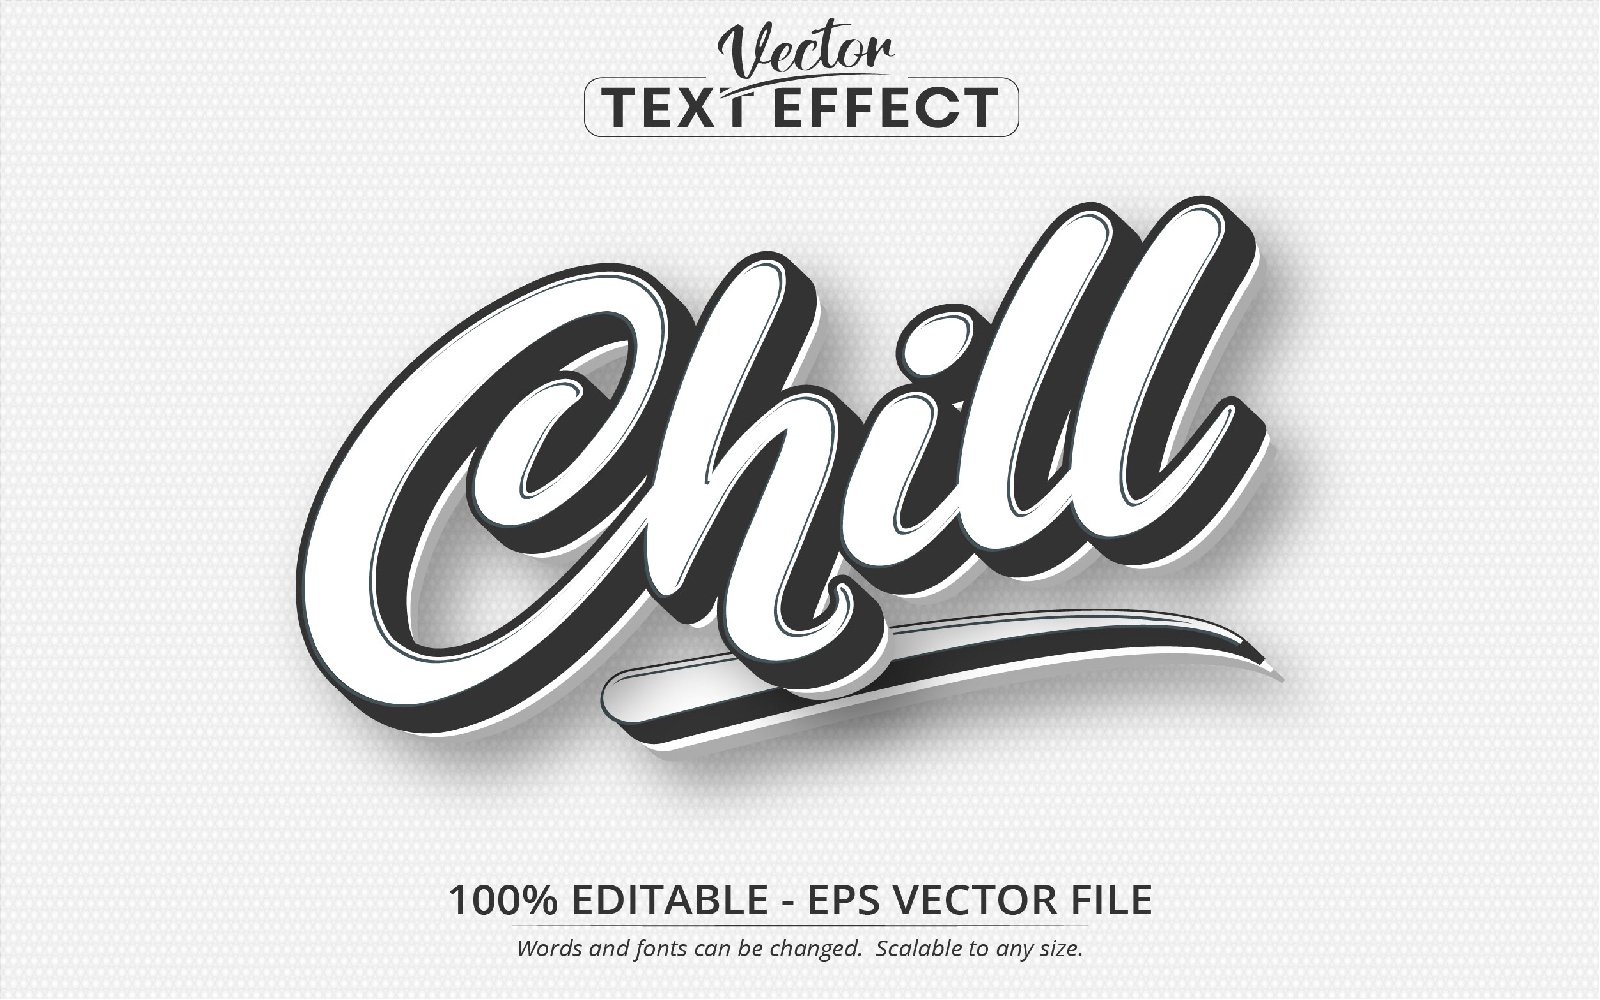 Chill - Minimalistic Style, Editable Text Effect, Font Style, Graphics Illustration